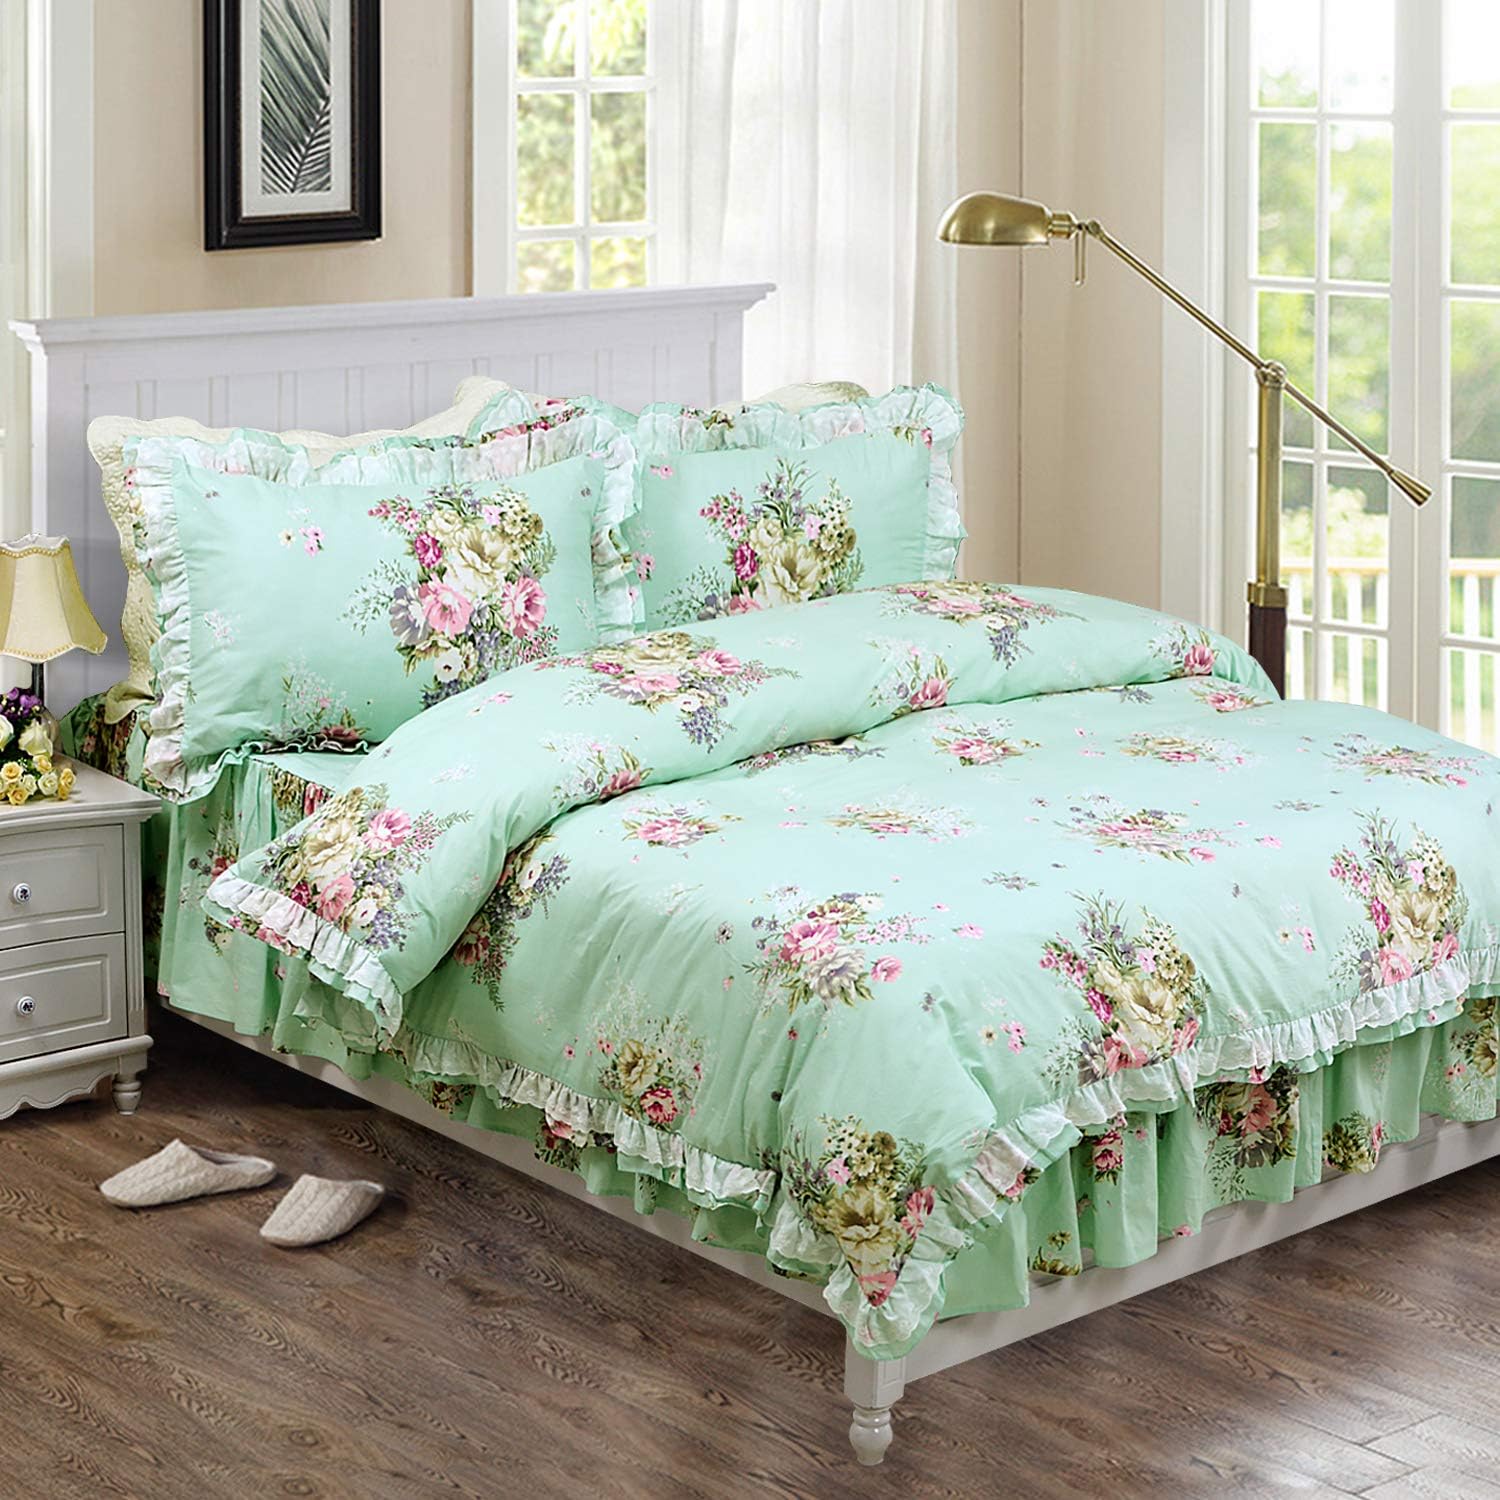 FADFAY Shabby Green Floral Bedding 100% Cotton Princess Lace Ruffle Girls Duvet Cover Set with Bedskirt, 4Pcs, Twin Size